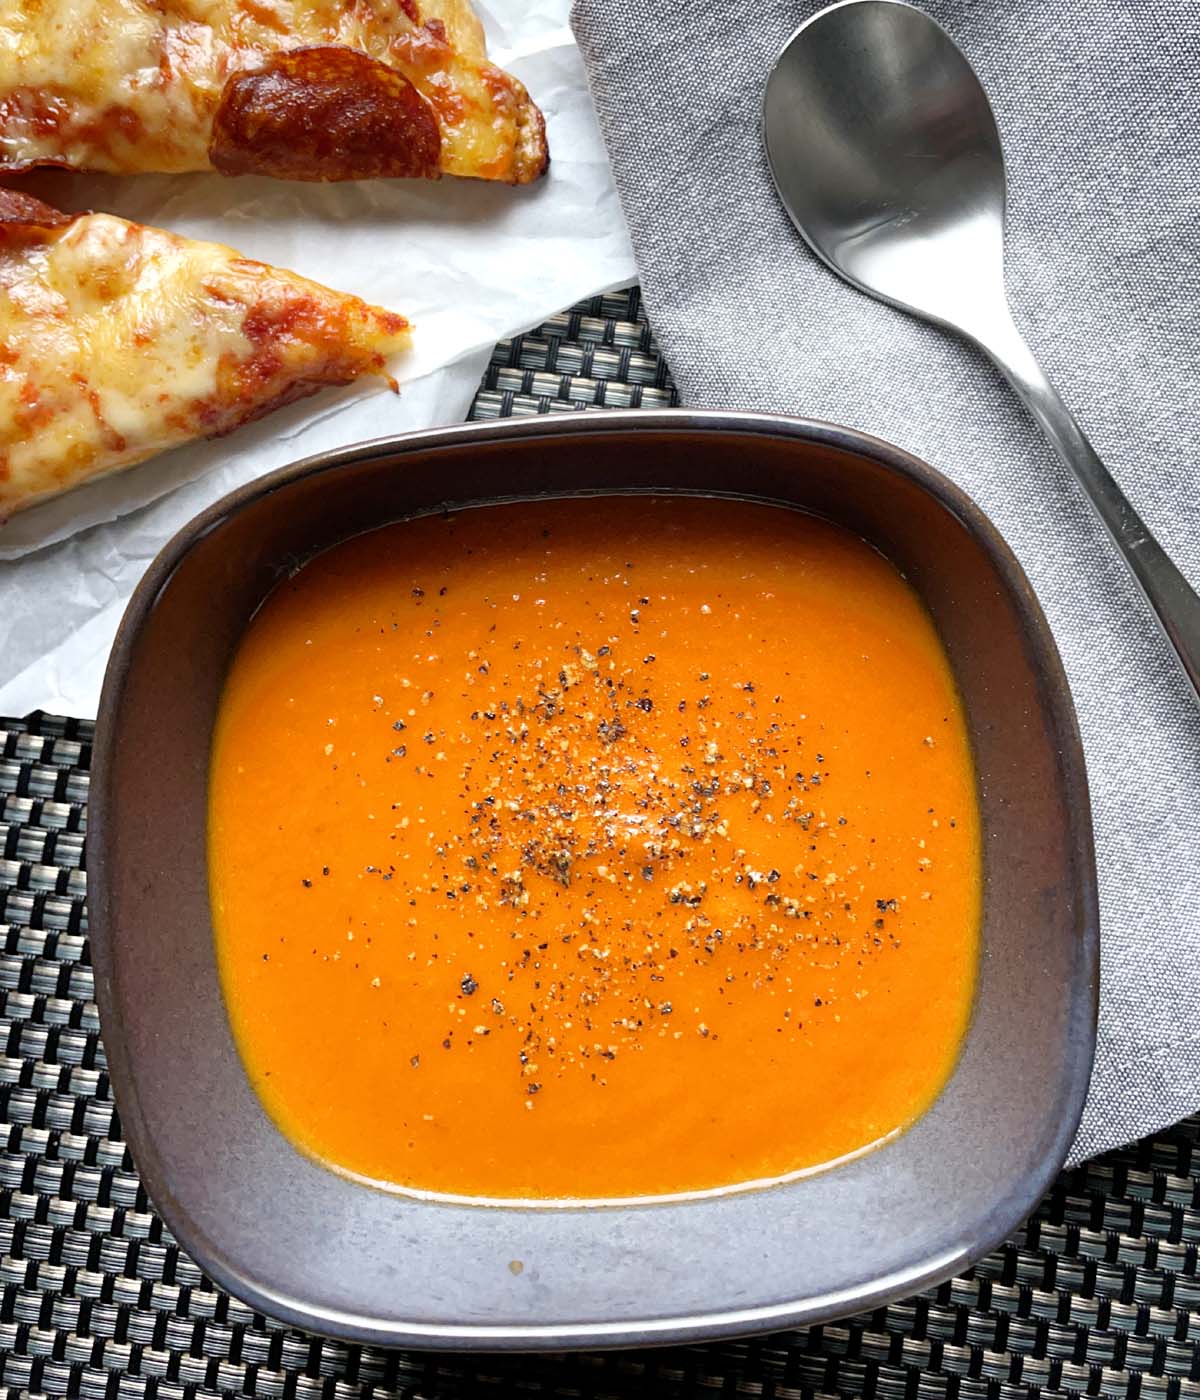 A squarish grey bowl containing roasted tomato soup, next to a spoon and a couple slices of pizza.